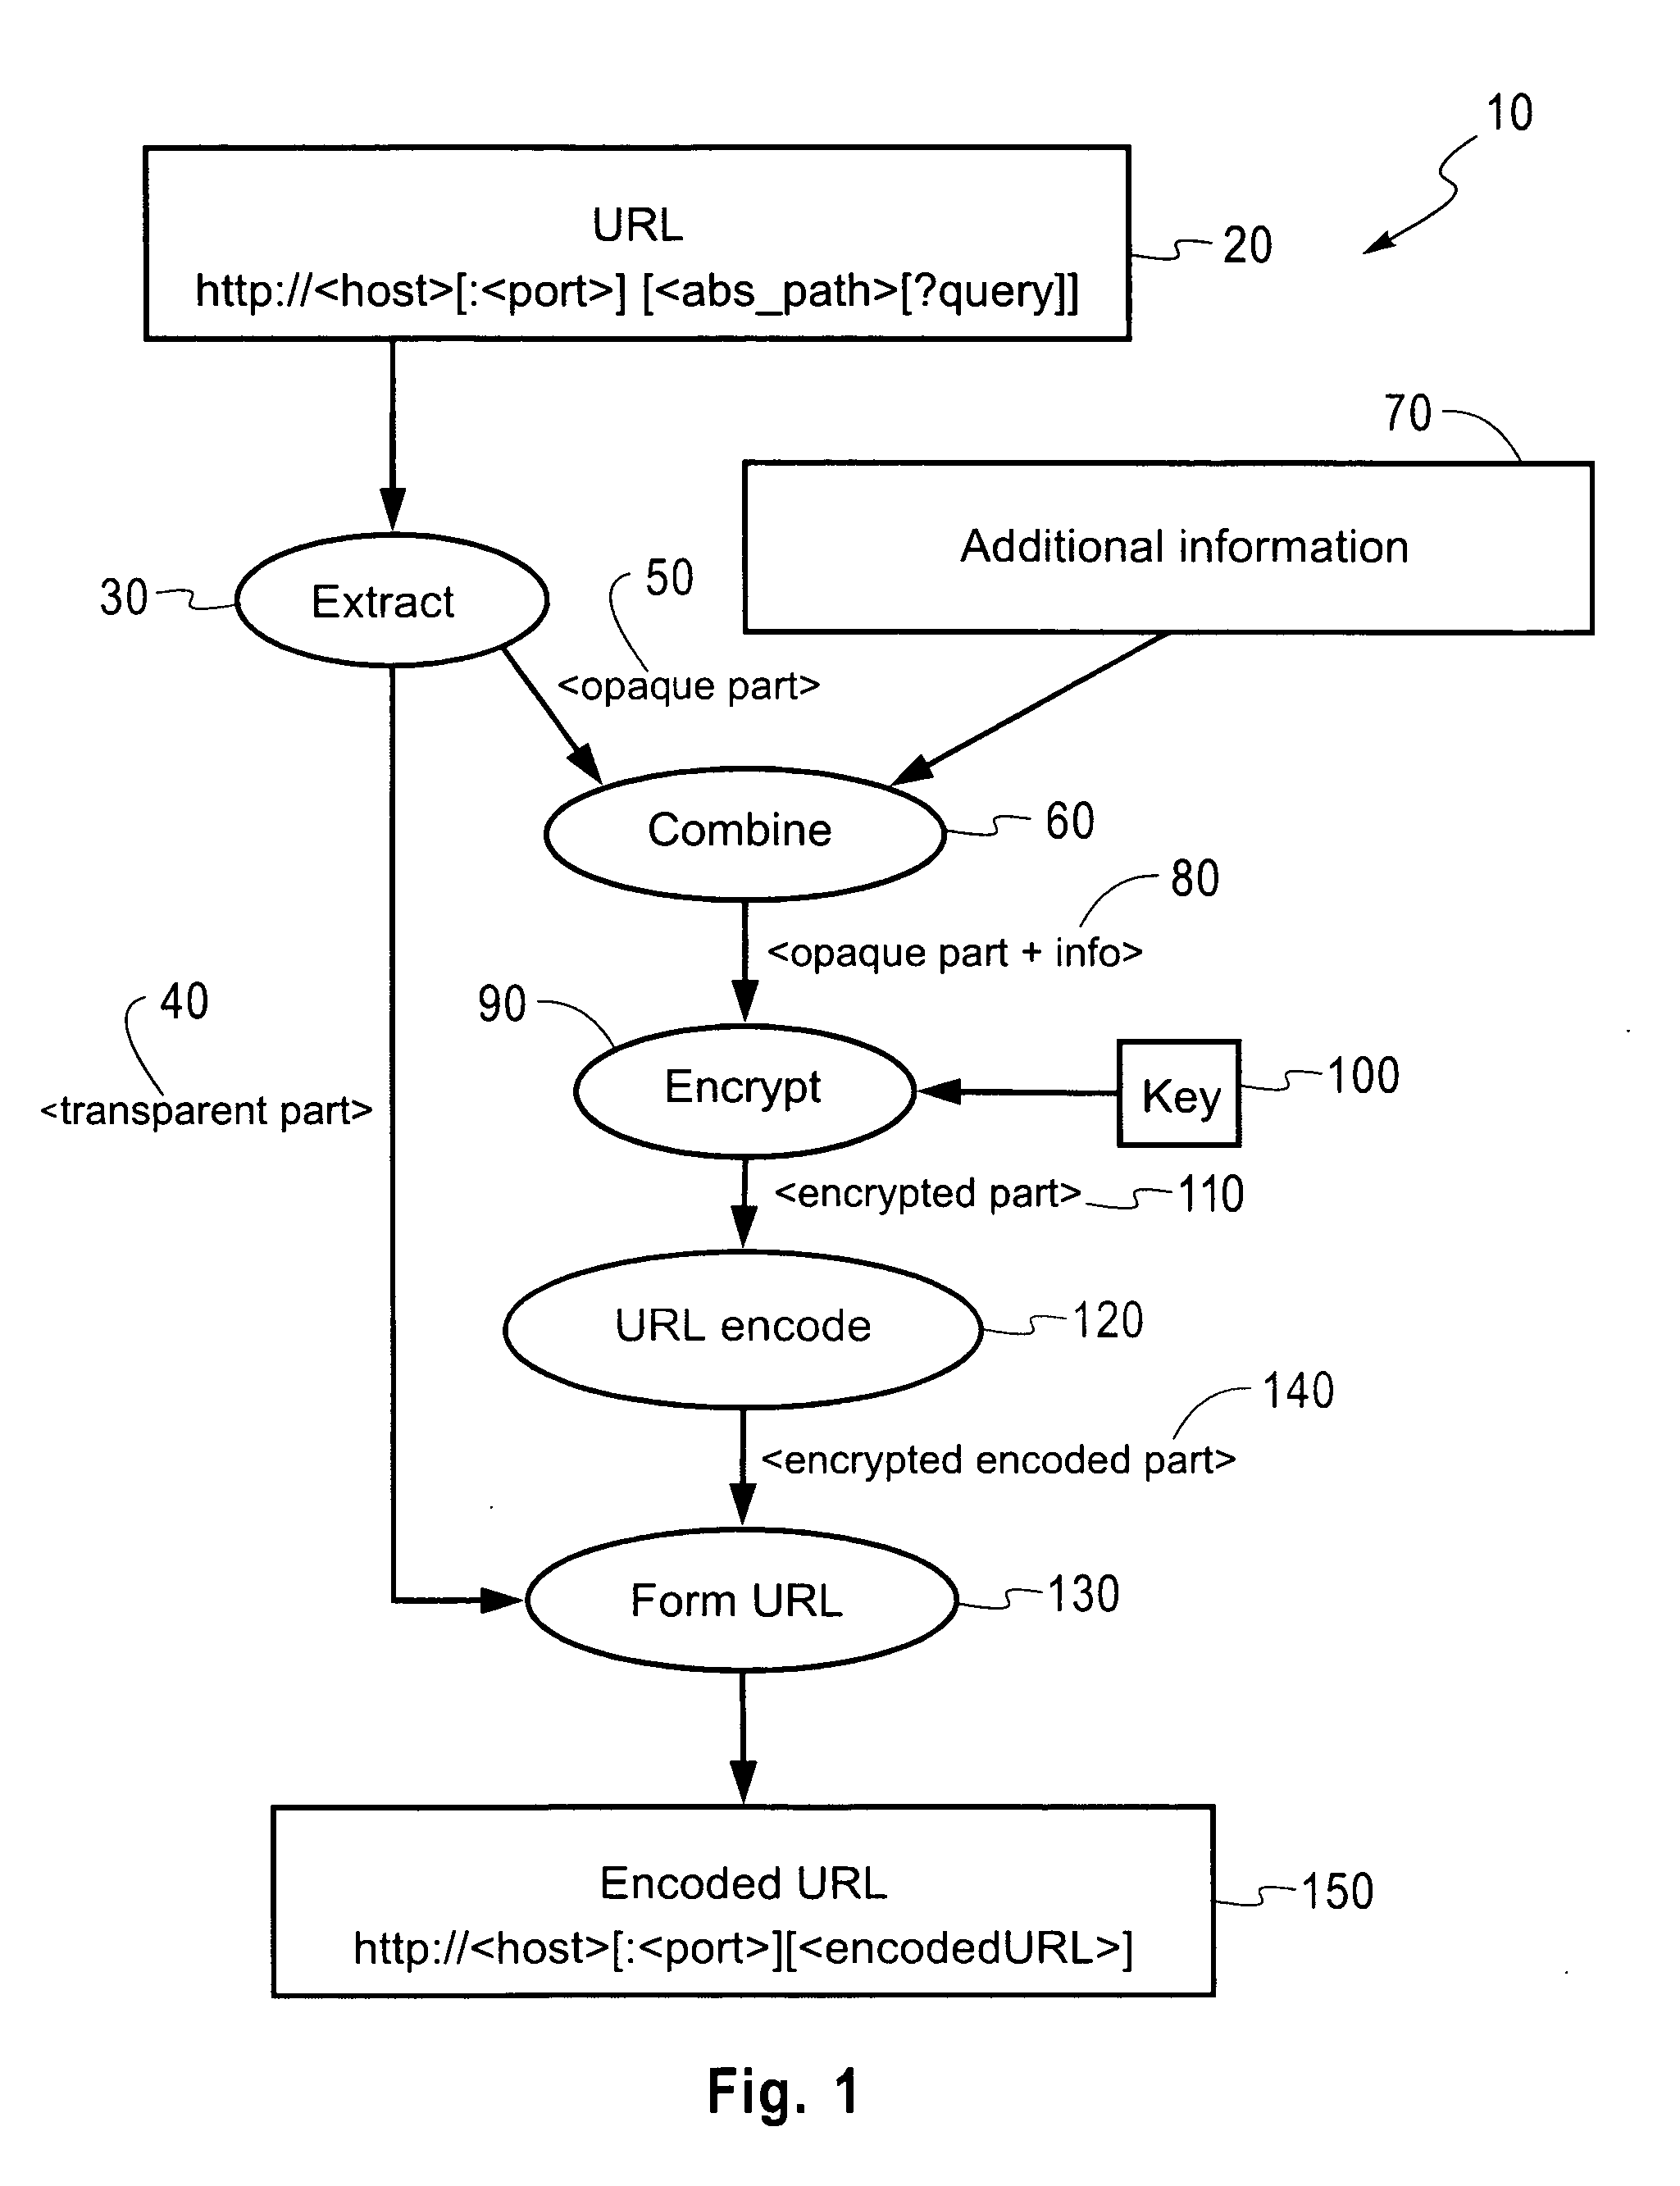 Stateless methods for resource hiding and access control support based on URI encryption